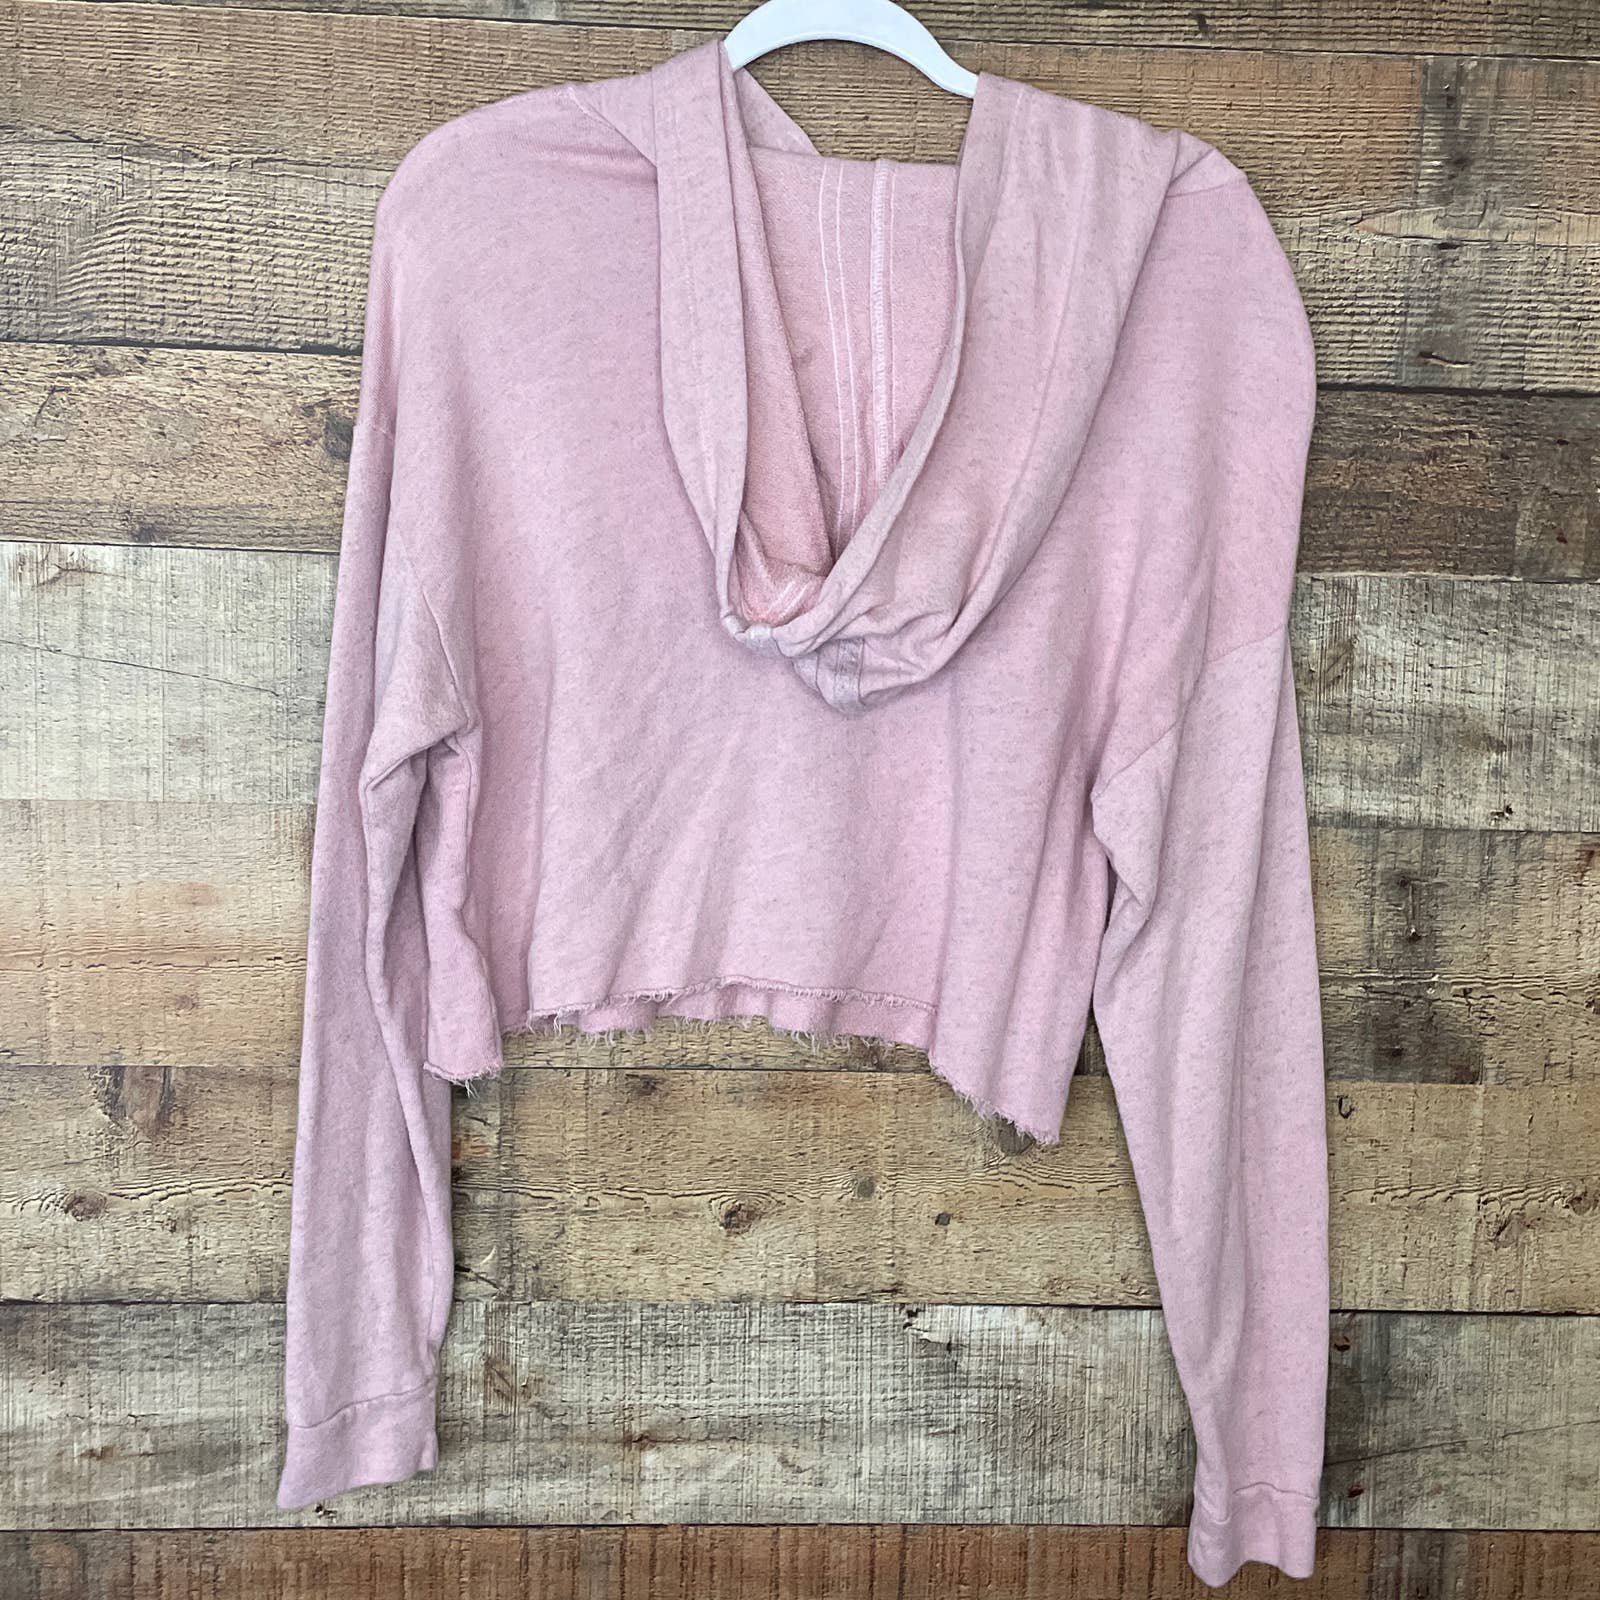 the Lowest price Good hYOUman Anya Pink Cropped Hoodie Sweatshirt For All Woman Kind Size Small MjNh6CJH5 Low Price